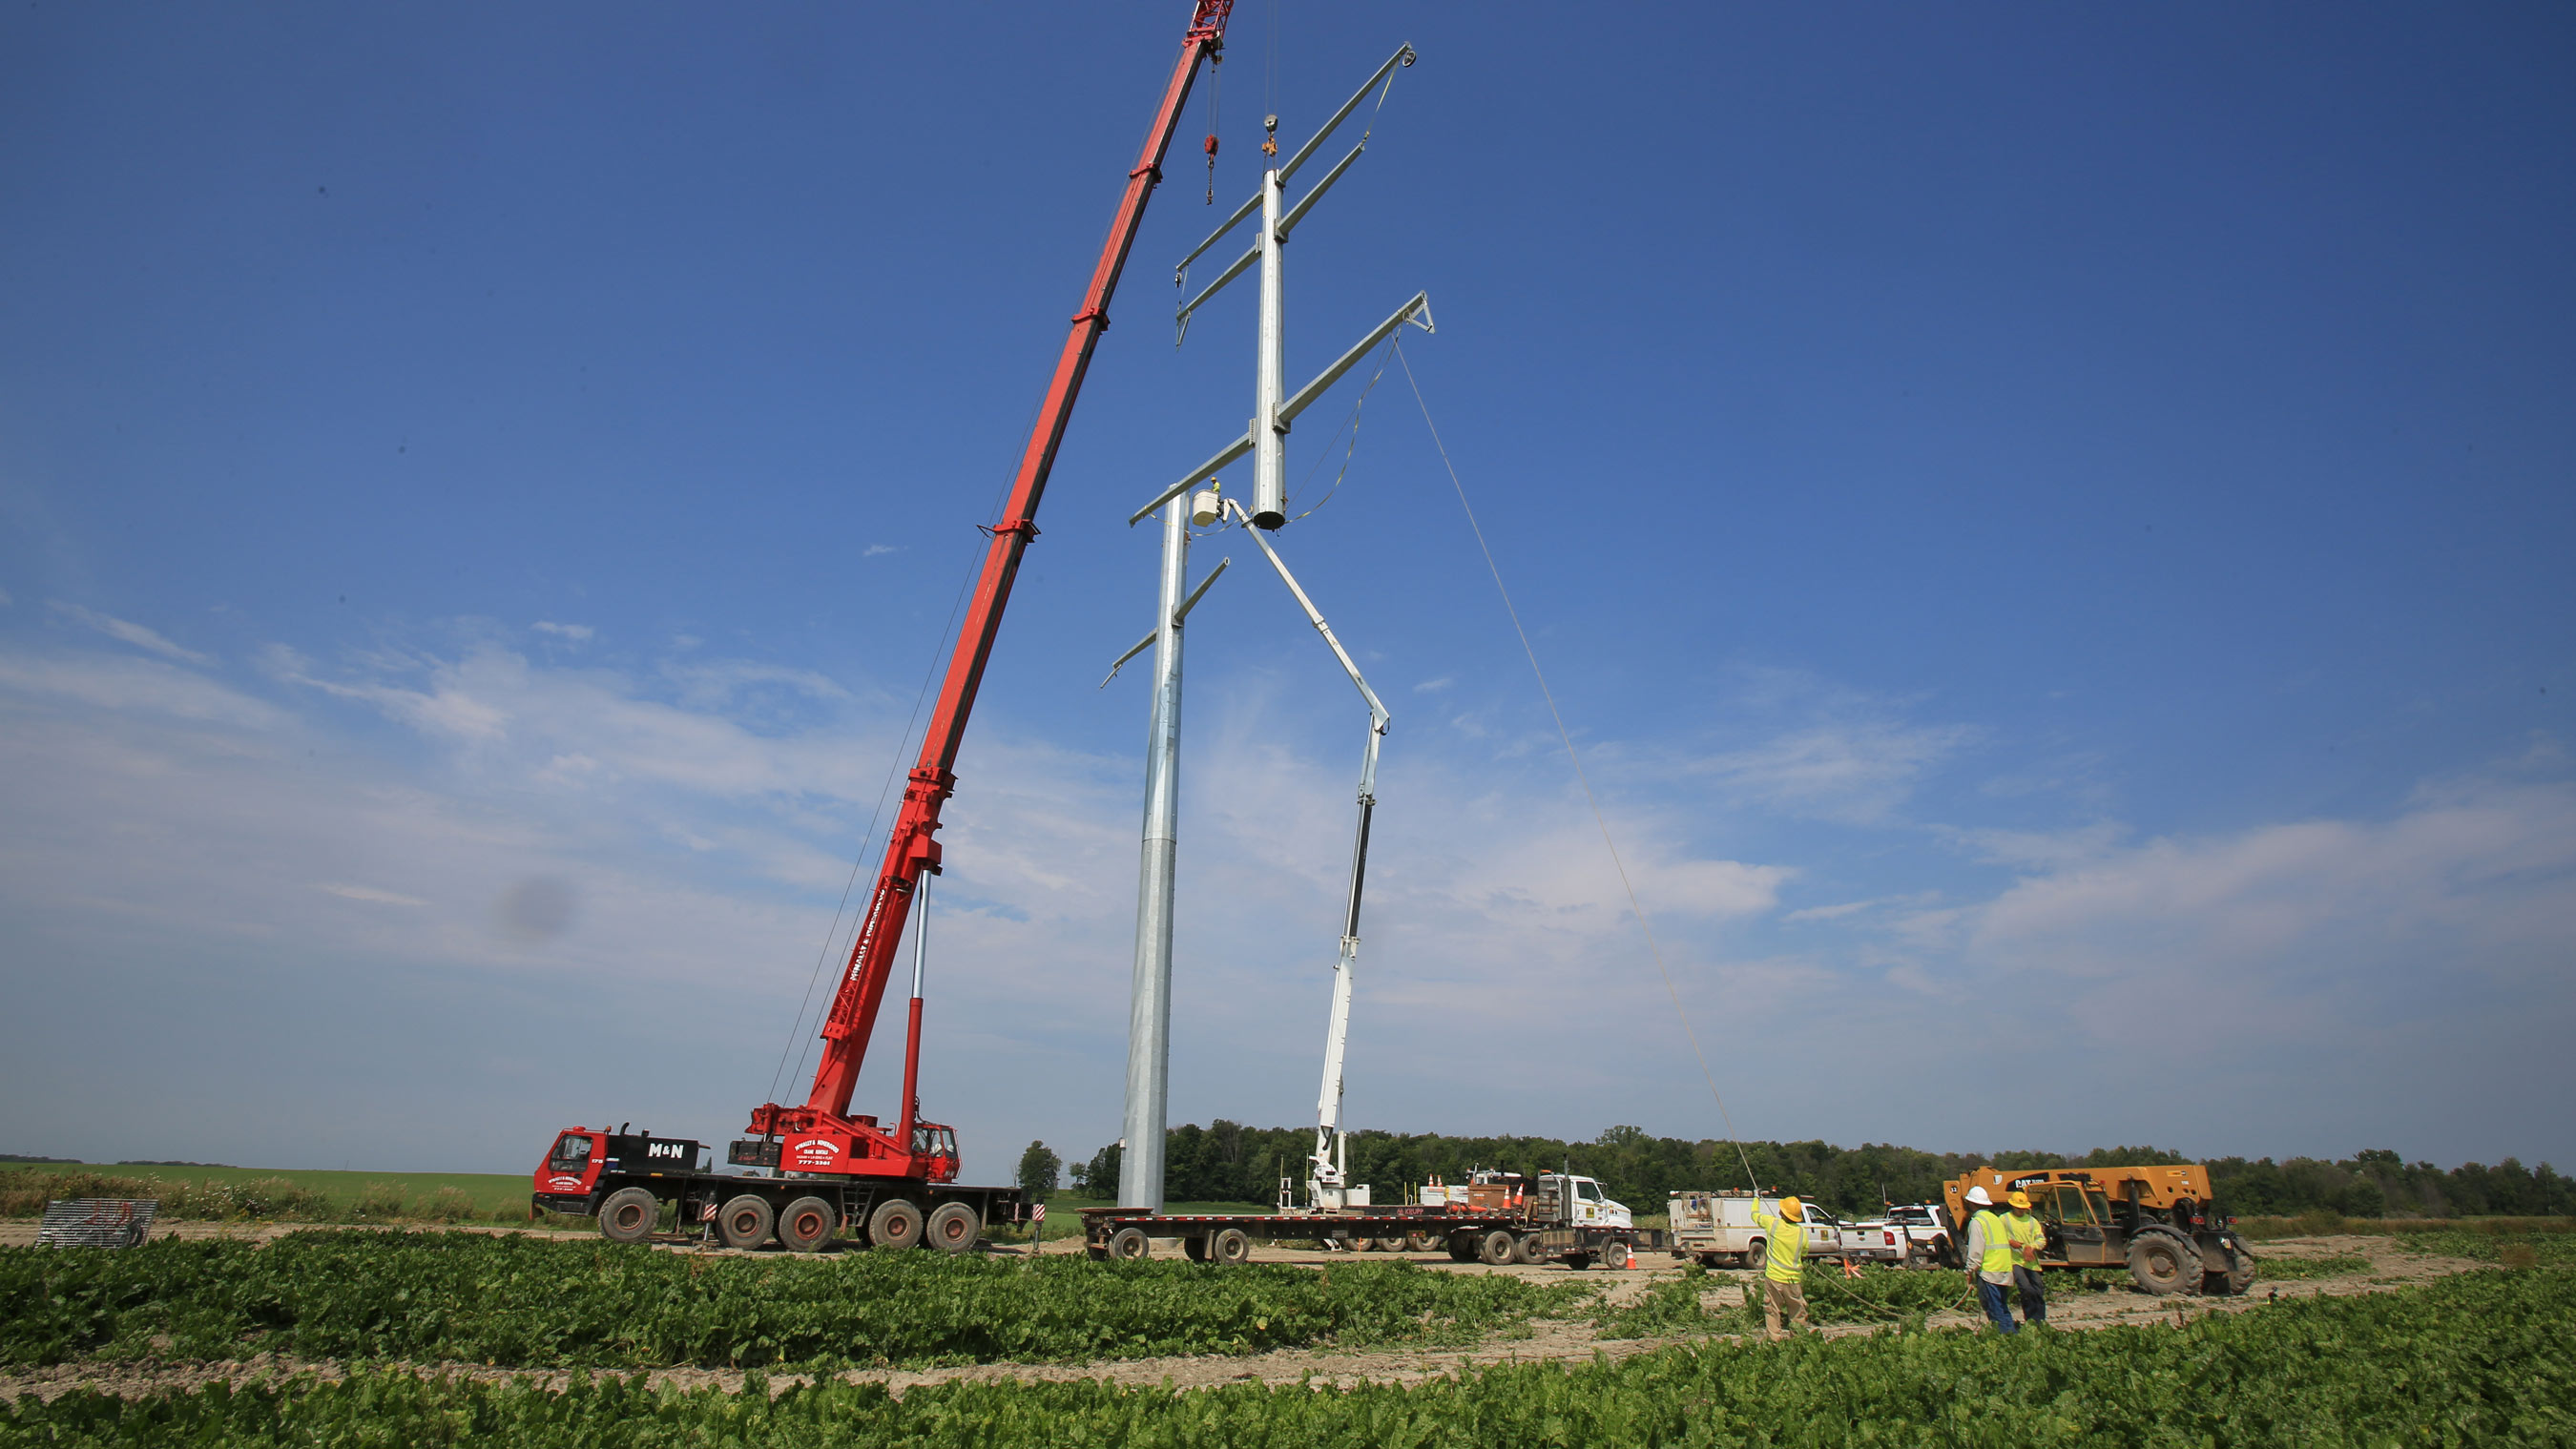 The pole assembly process takes about four hours per pole and was completed nearly 800 times over the three-year construction period.